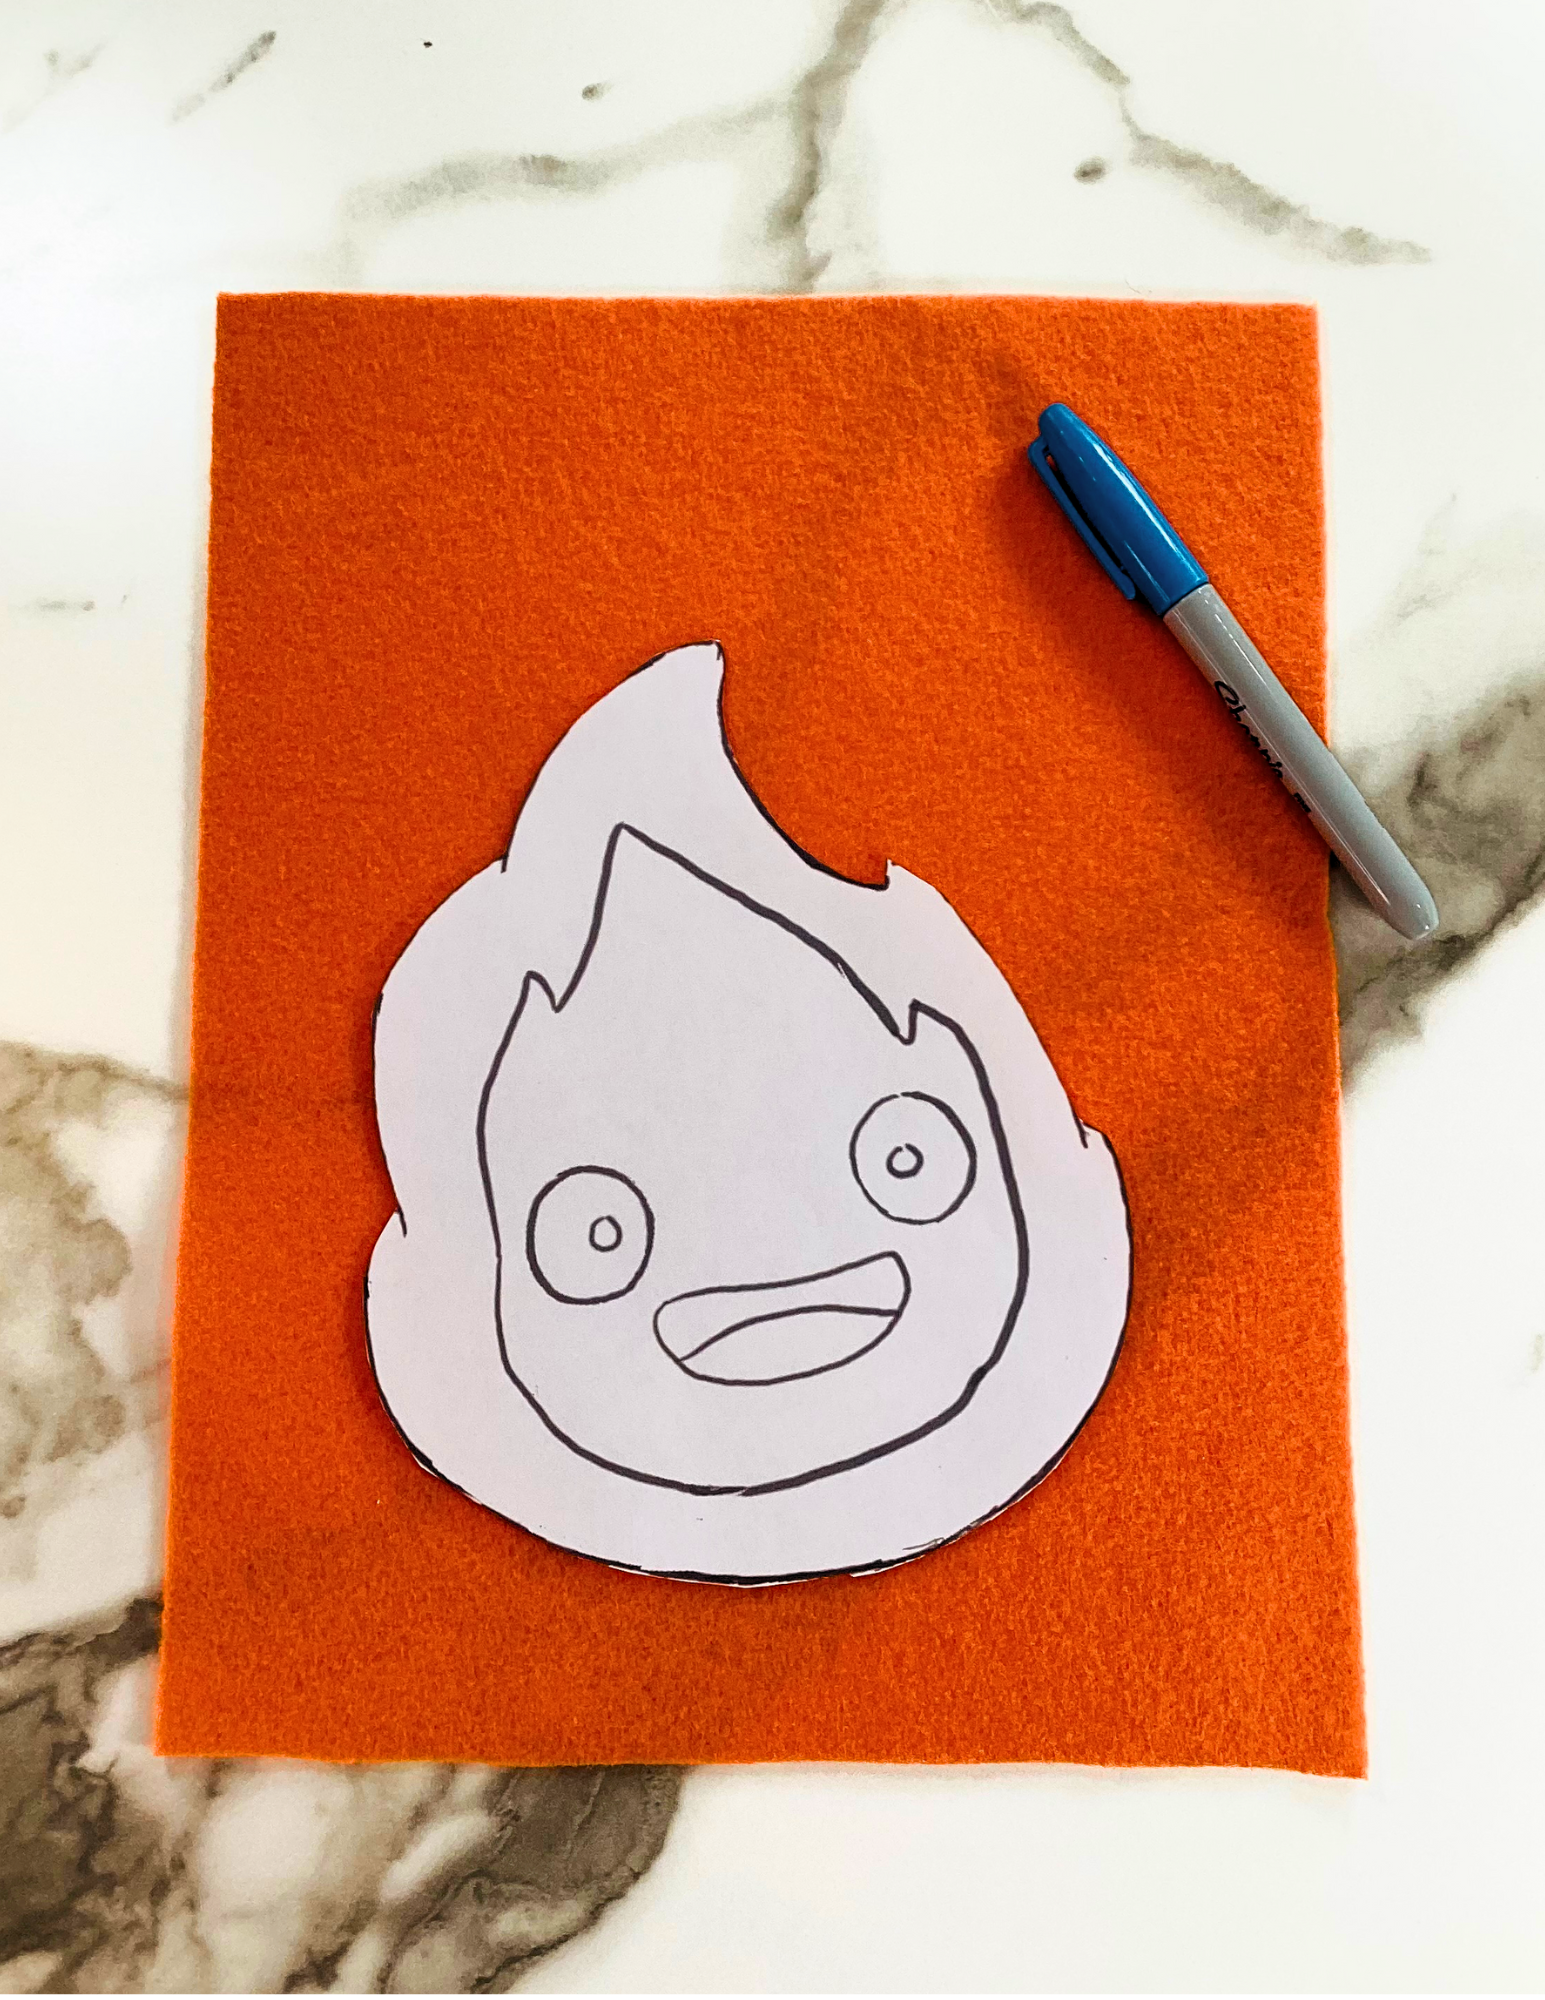 begin by cutting out first layer of DIY calcifer template to trace